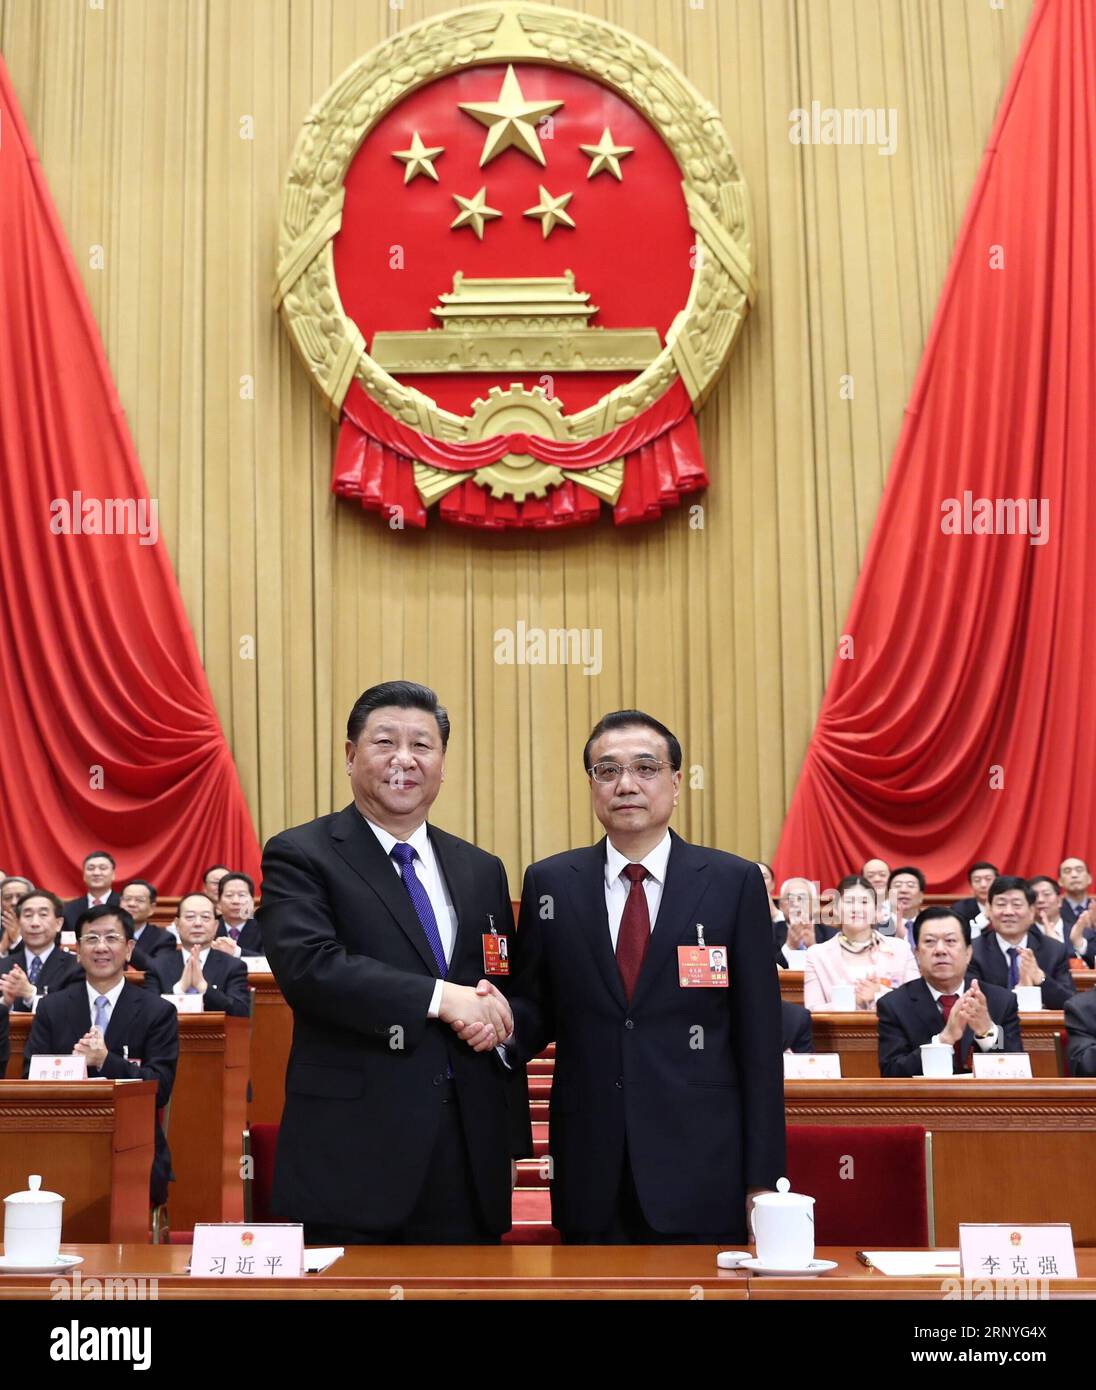 Bilder des Tages (180318) -- BEIJING, March 18, 2018 -- Xi Jinping (L, front) shakes hands with Li Keqiang at the sixth plenary meeting of the first session of the 13th National People s Congress (NPC) at the Great Hall of the People in Beijing, capital of China, March 18, 2018. Li Keqiang was endorsed as Chinese premier Sunday at the ongoing first session of the 13th NPC, the country s national legislature. Nearly 3,000 NPC deputies voted to approve the premiership nomination of Li, by newly-elected President Xi Jinping. ) (TWO SESSIONS)CHINA-BEIJING-XI JINPING-LI KEQIANG-NPC-SIXTH PLENARY ME Stock Photo